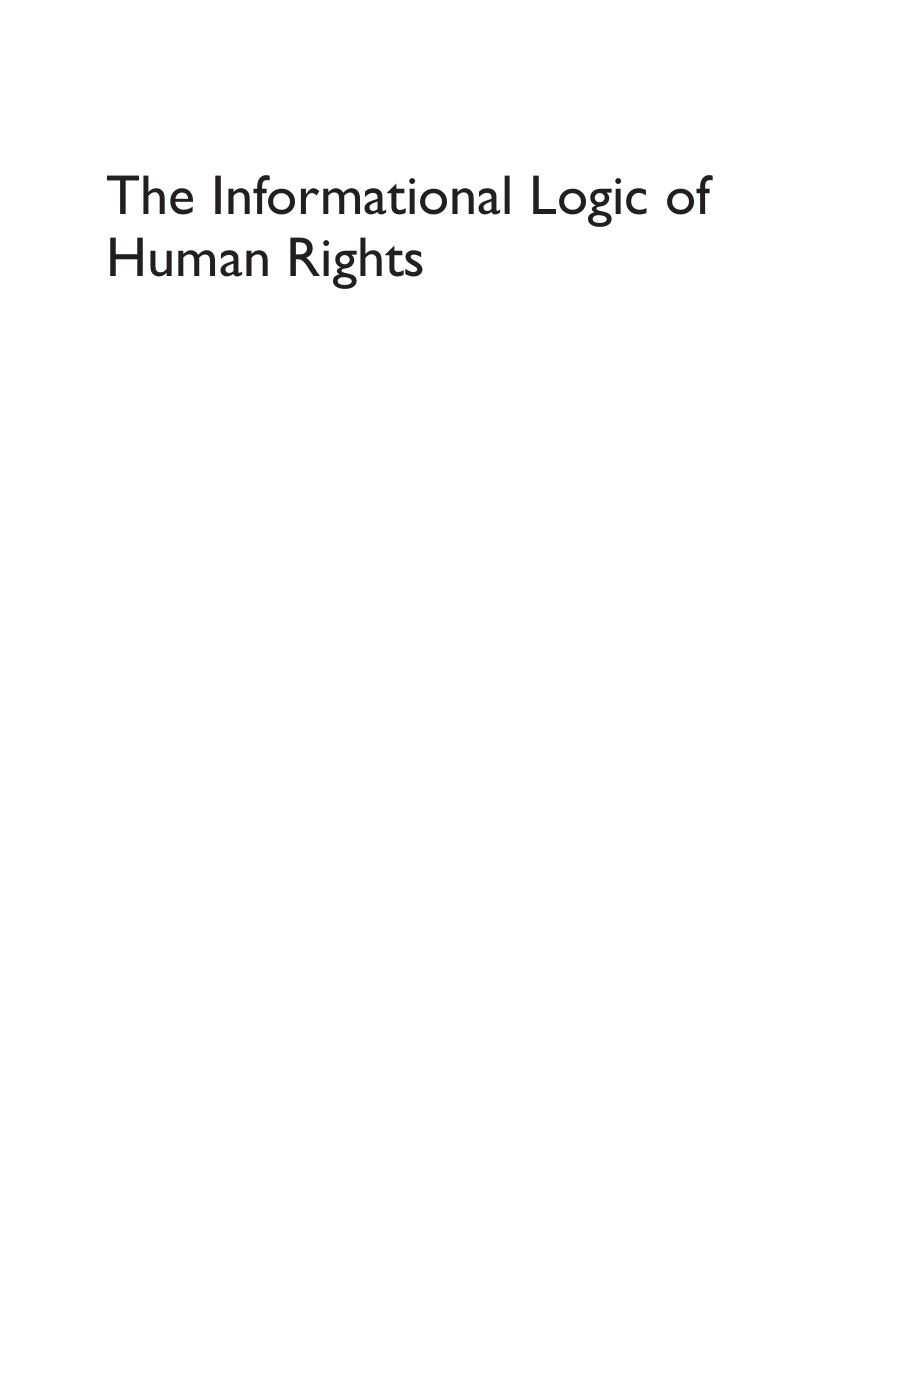 The Informational Logic of Human Rights: Network Imaginaries in the Cybernetic Age by Joshua Bowsher